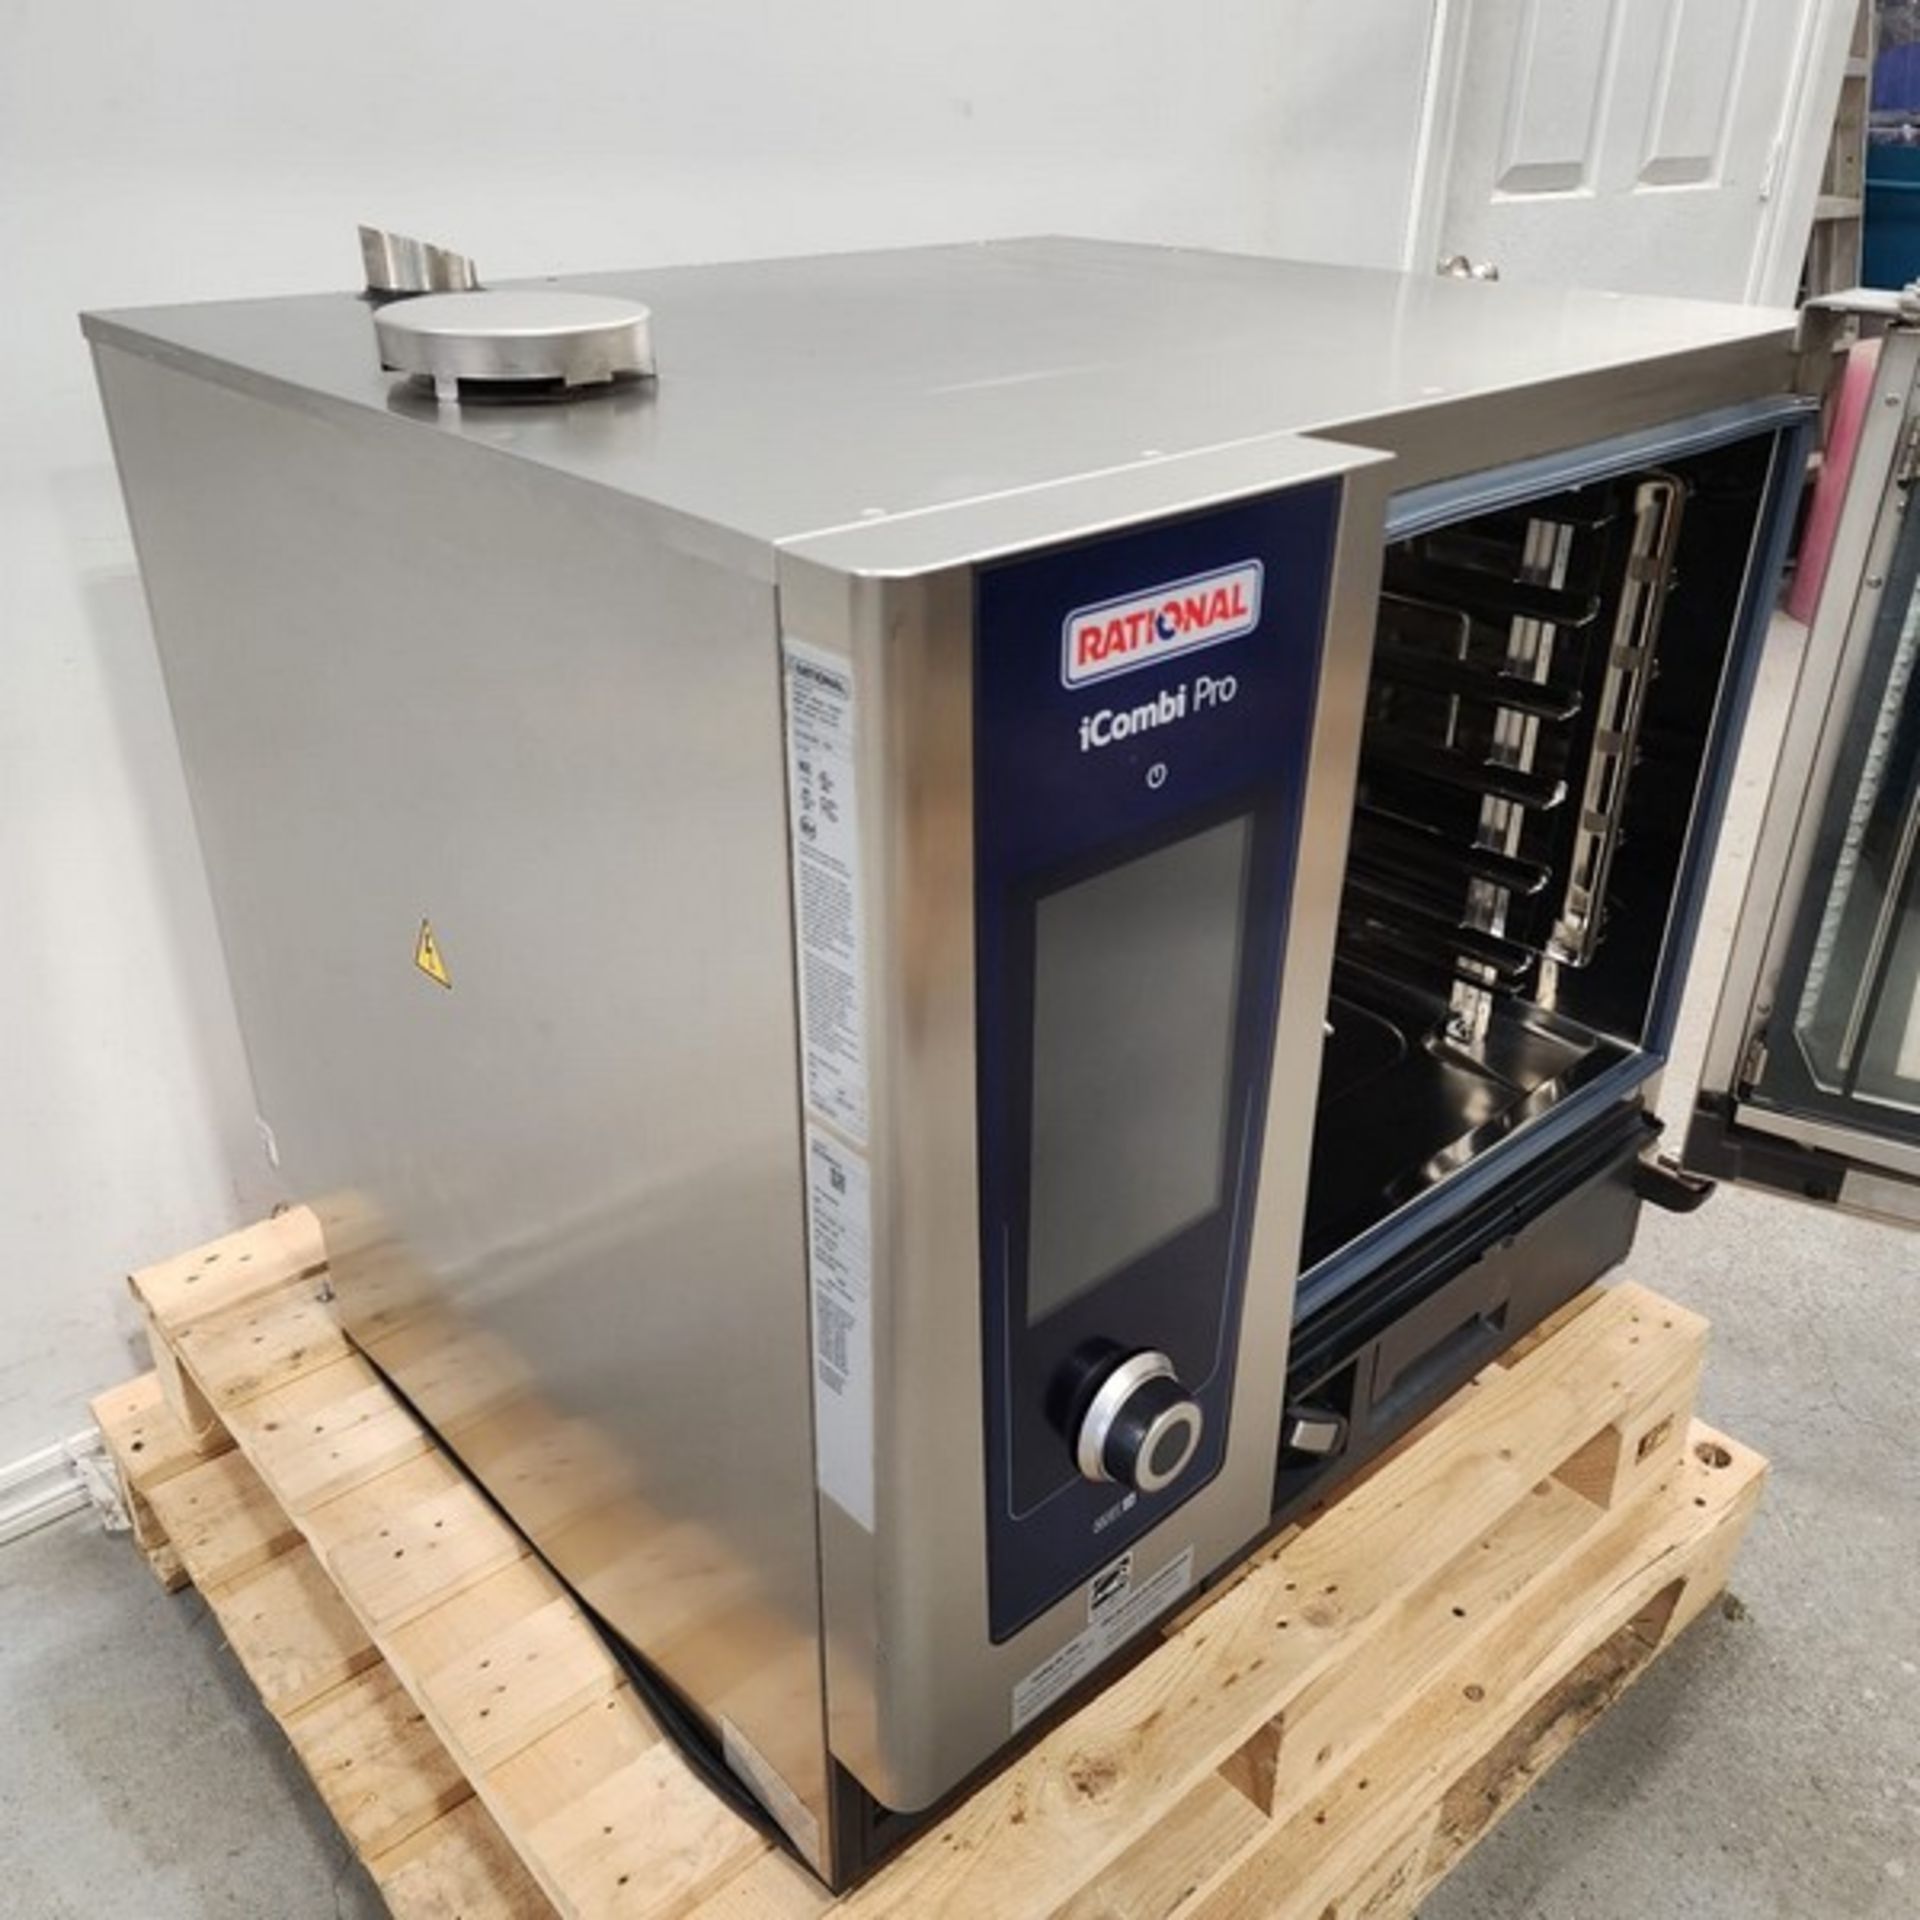 Rational Oven 480 v 3 phase brand new icombi pro new condition (Item #103R) (simple loading Fee $ - Image 2 of 7